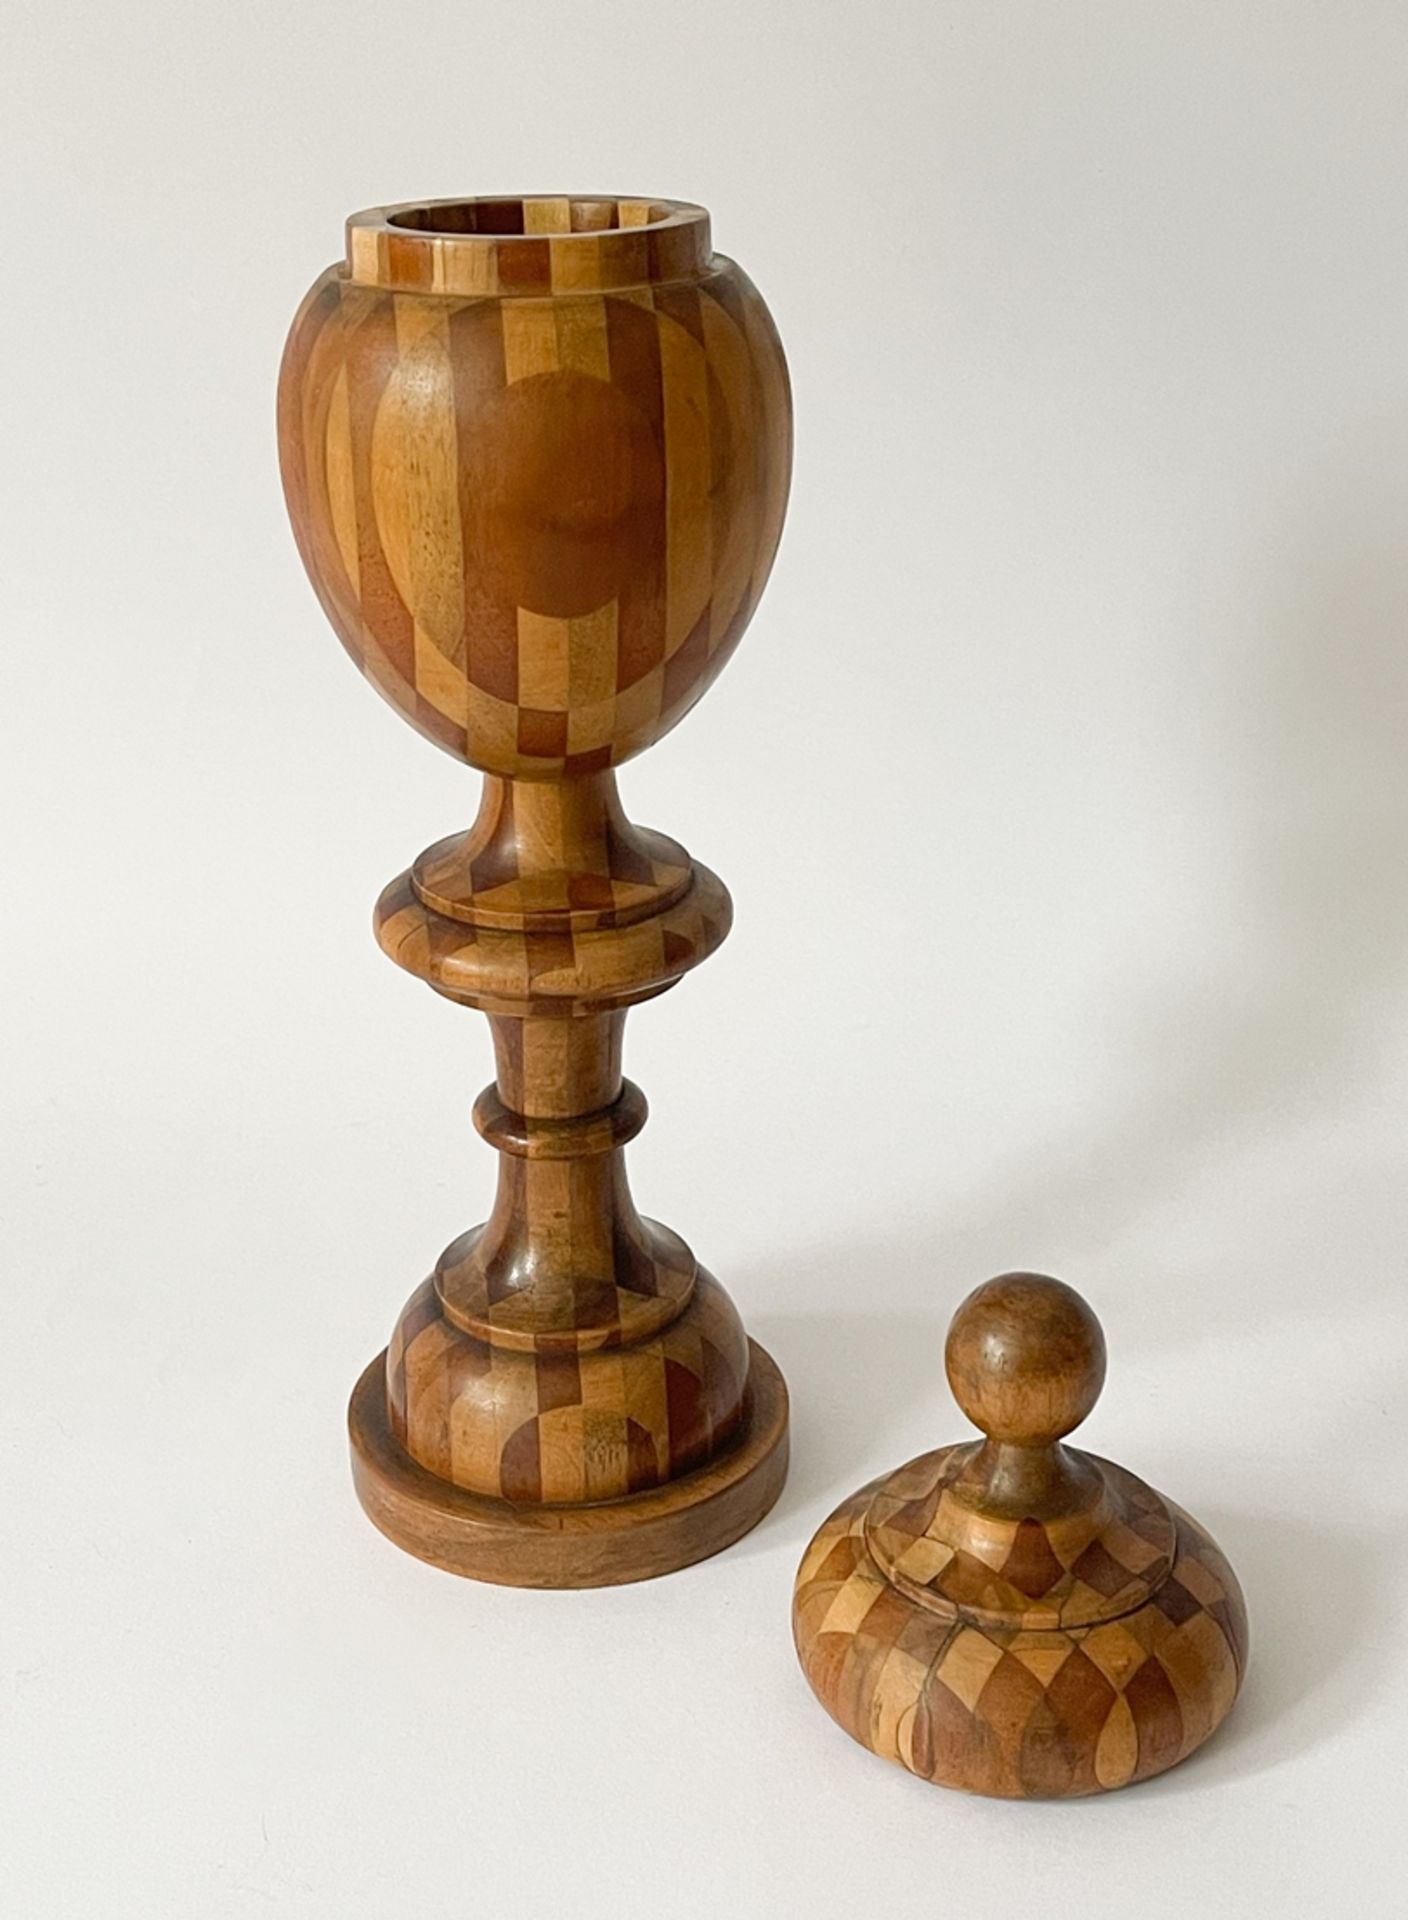 Masterpiece wooden goblet with lid - Image 2 of 6